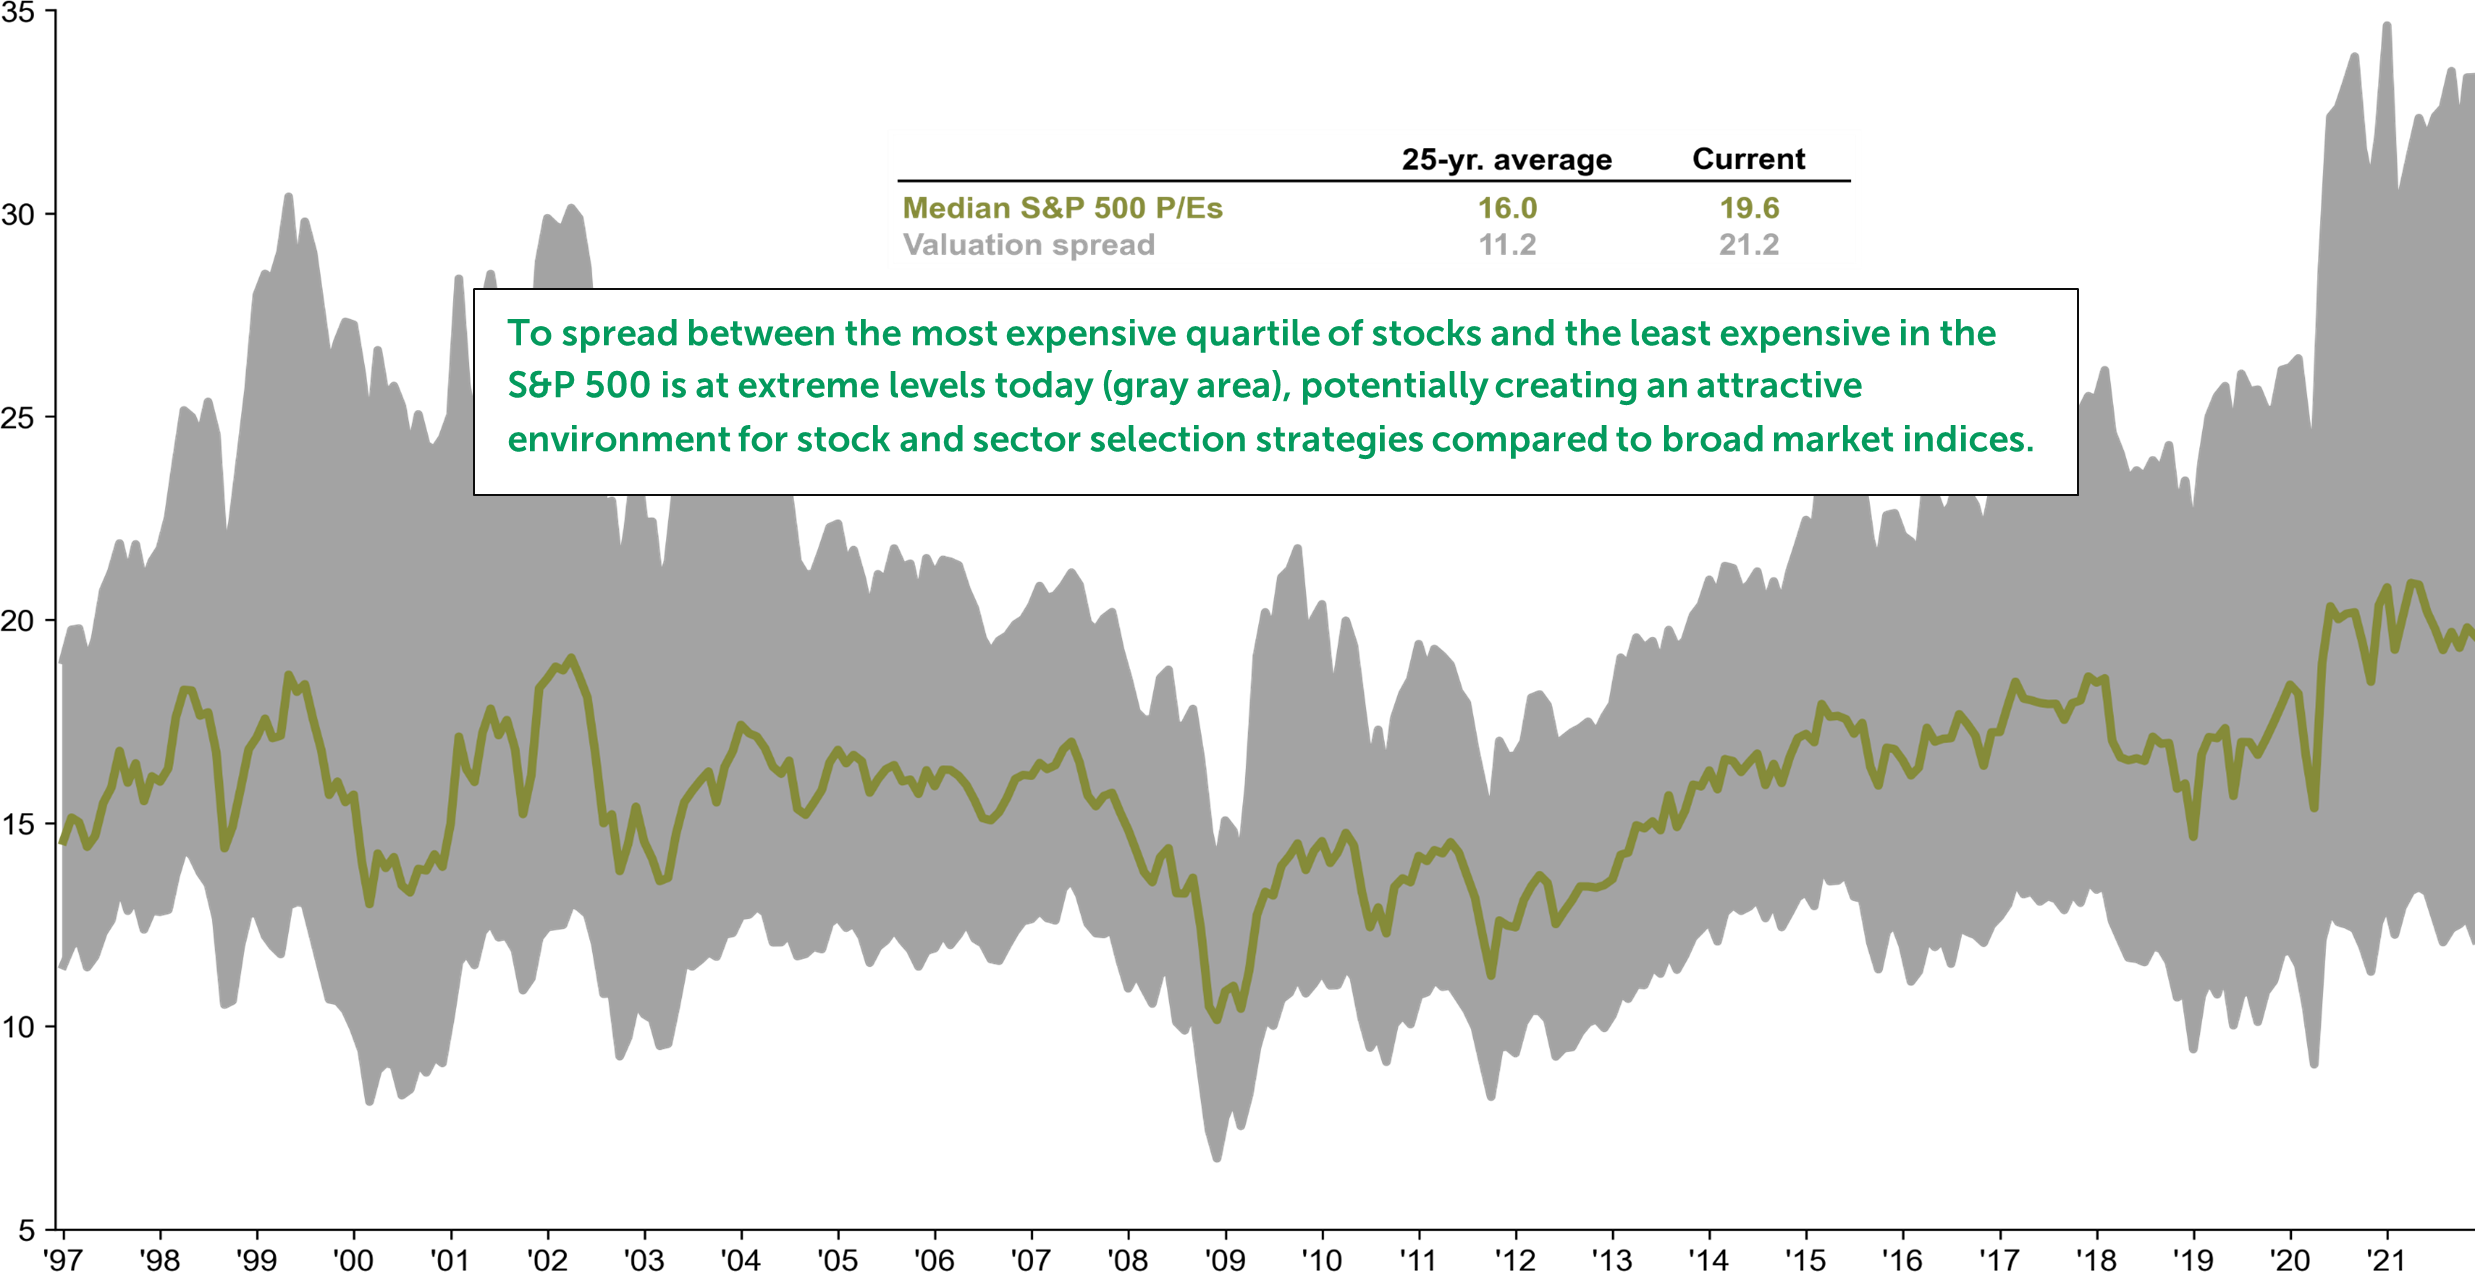 Line graph depicting Median S&P 500 P/Es as well as Valuation Spread, both for their 25-year average and their Current, from 1997 to 2021, with text reading: To spread between the most expensive quartile of stocks and the least expensive in the S&P 500 is at extreme levels today (gray area), potentially creating an attractive environment for stock and sector selection strategies compared to broad market indices.